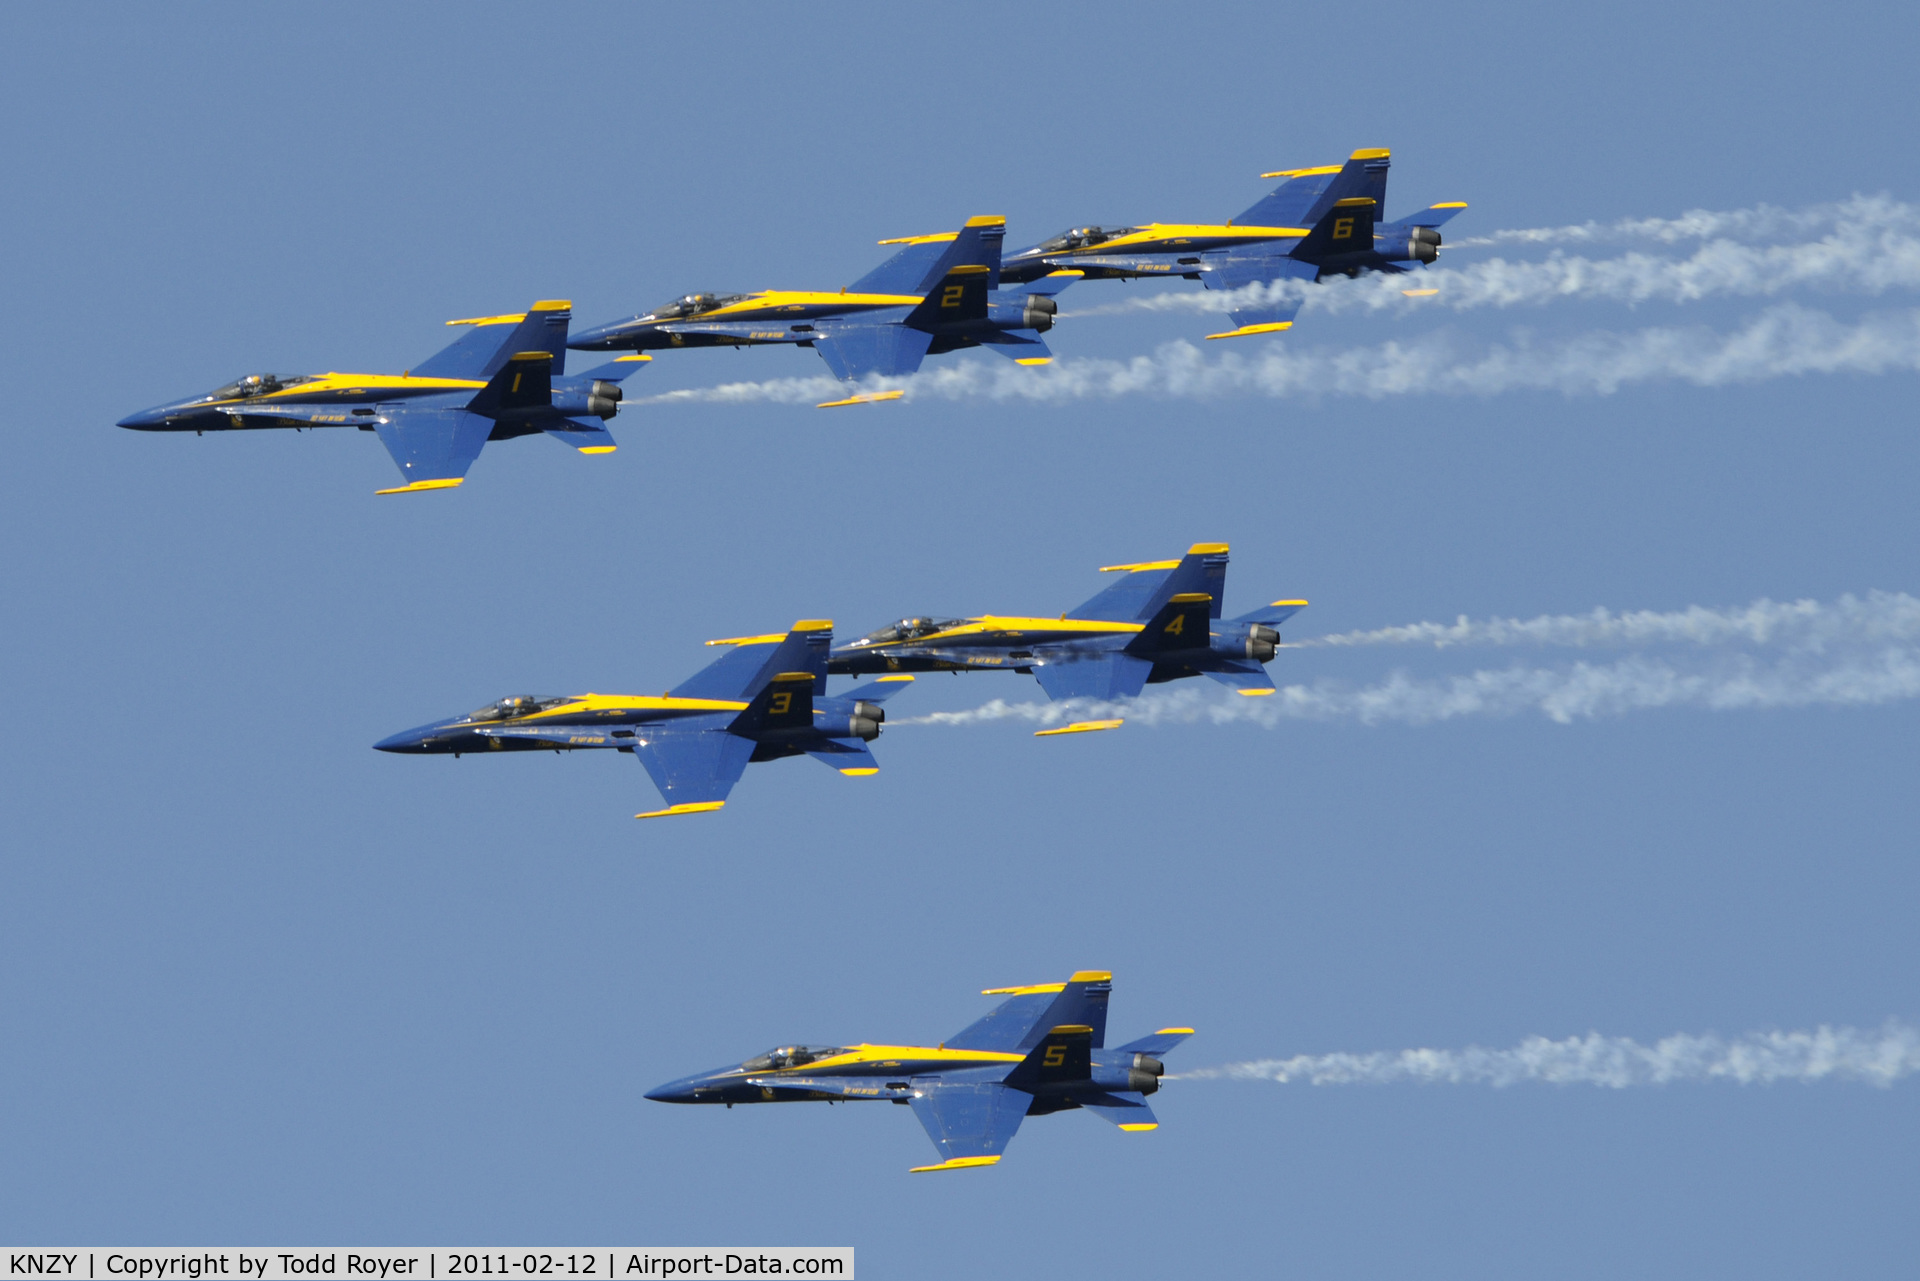 North Island Nas /halsey Field/ Airport (NZY) - Blue Angels at North Island